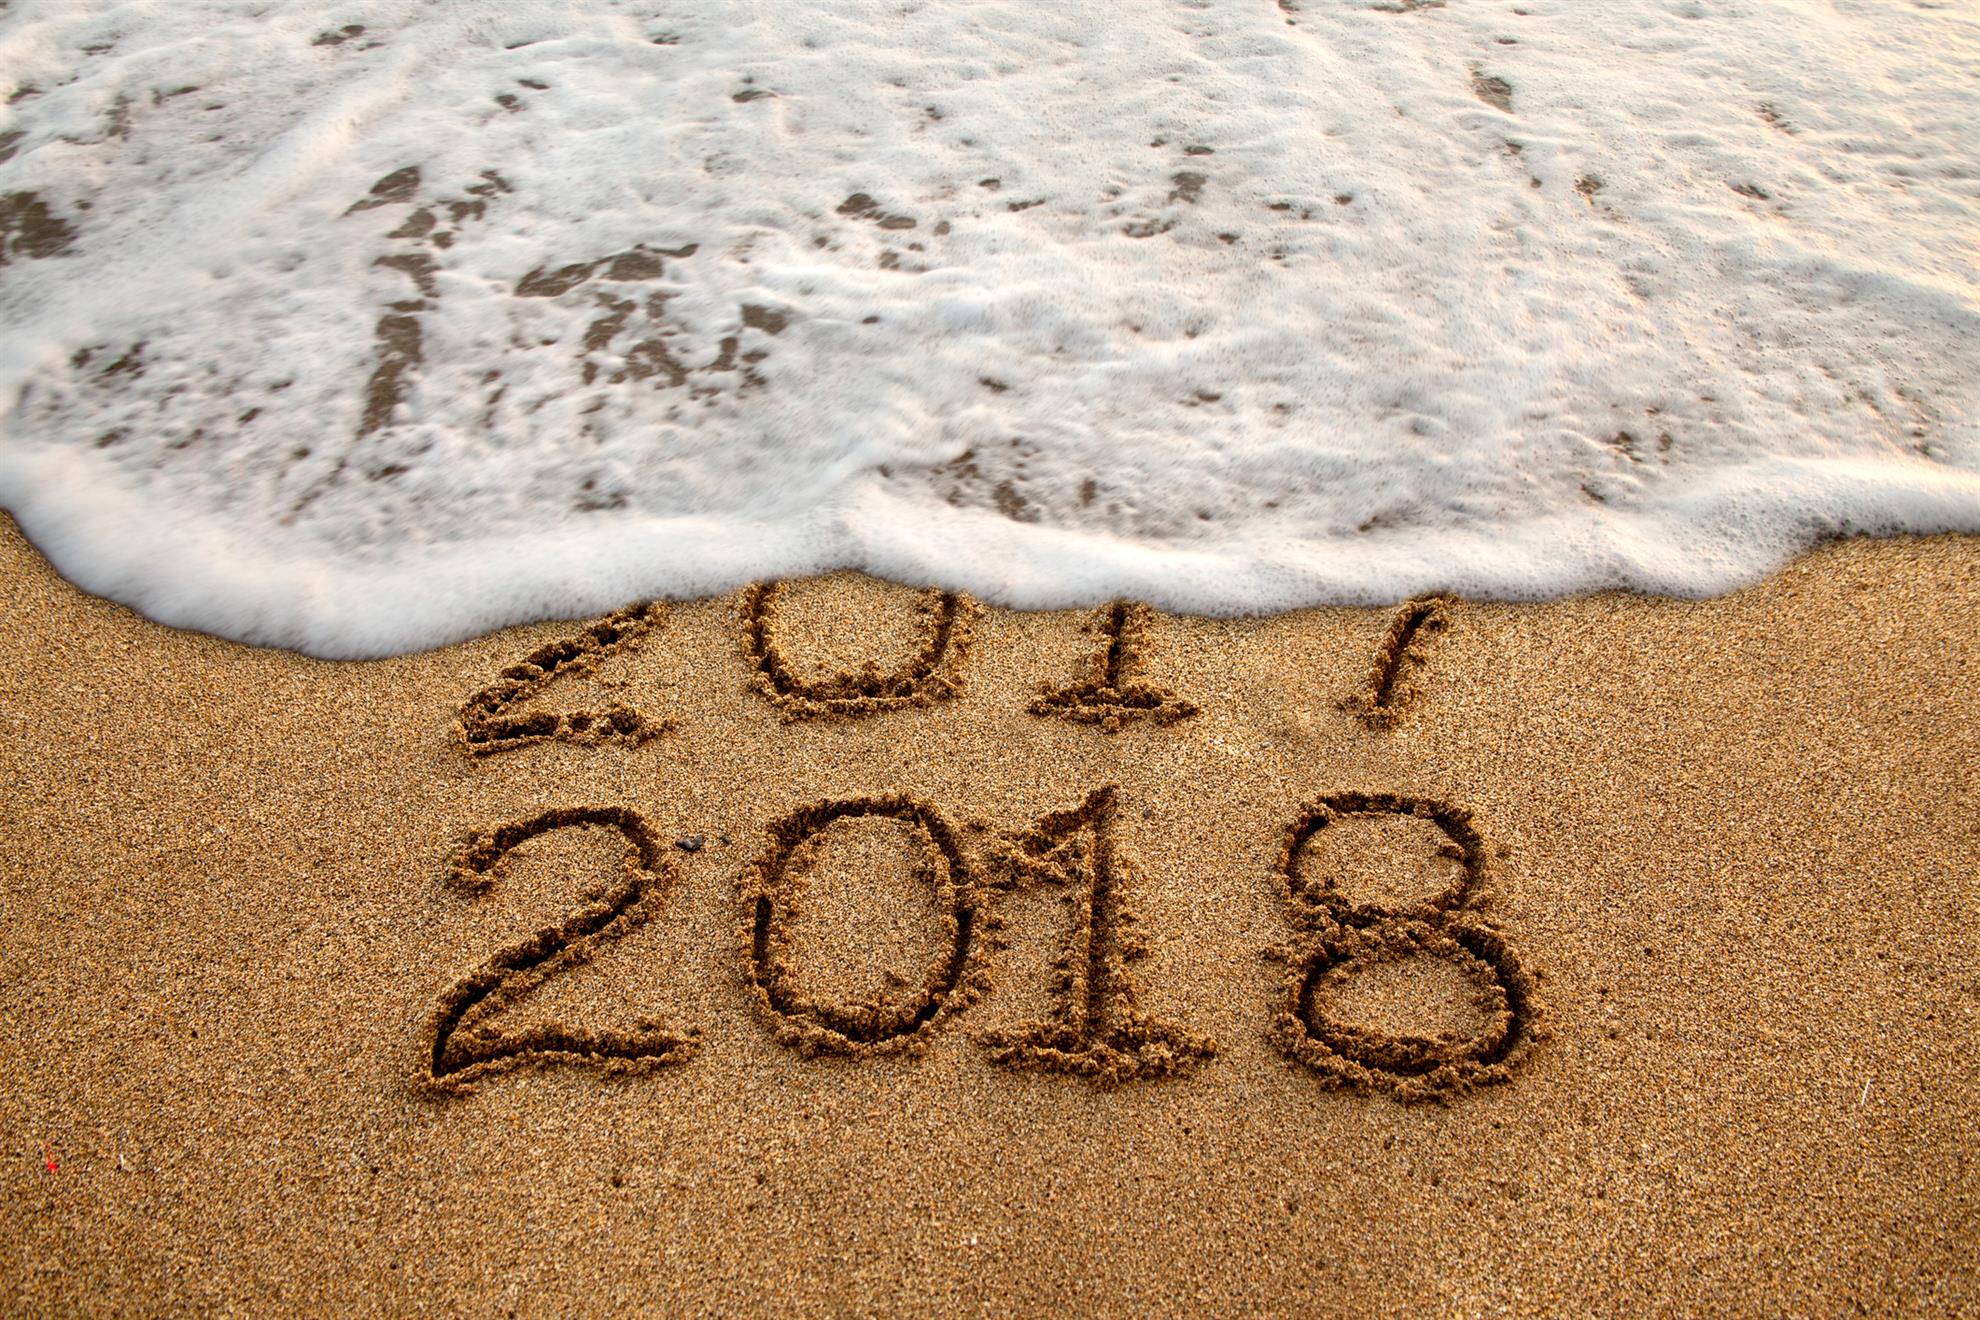 Water washes across the beach, where 2017 2018 are written in sand.